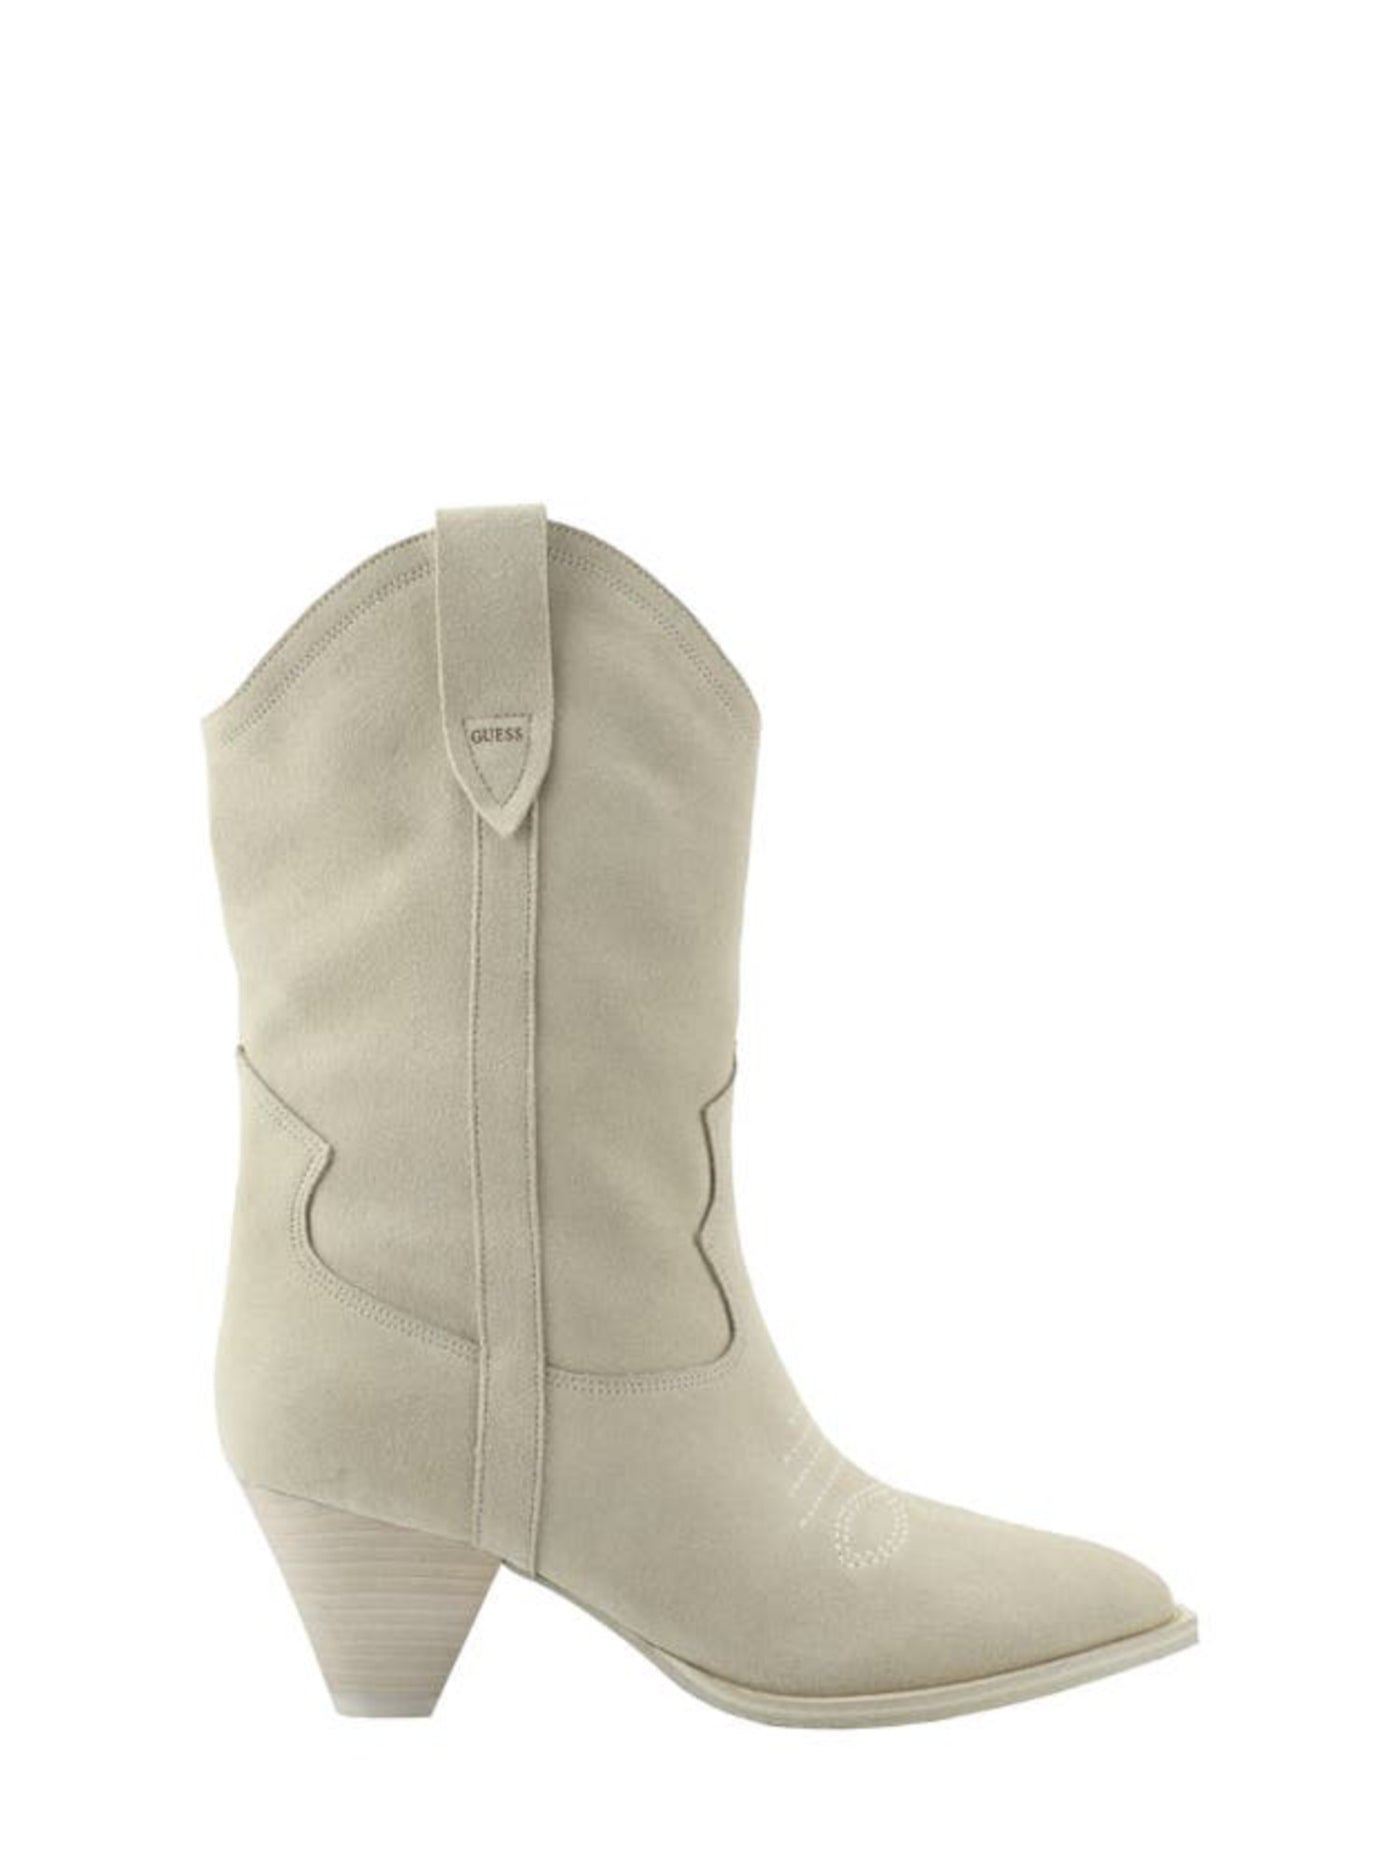 GUESS Womens Ivory Padded Odilia Round Toe Cone Heel Leather Western Boot 7 M